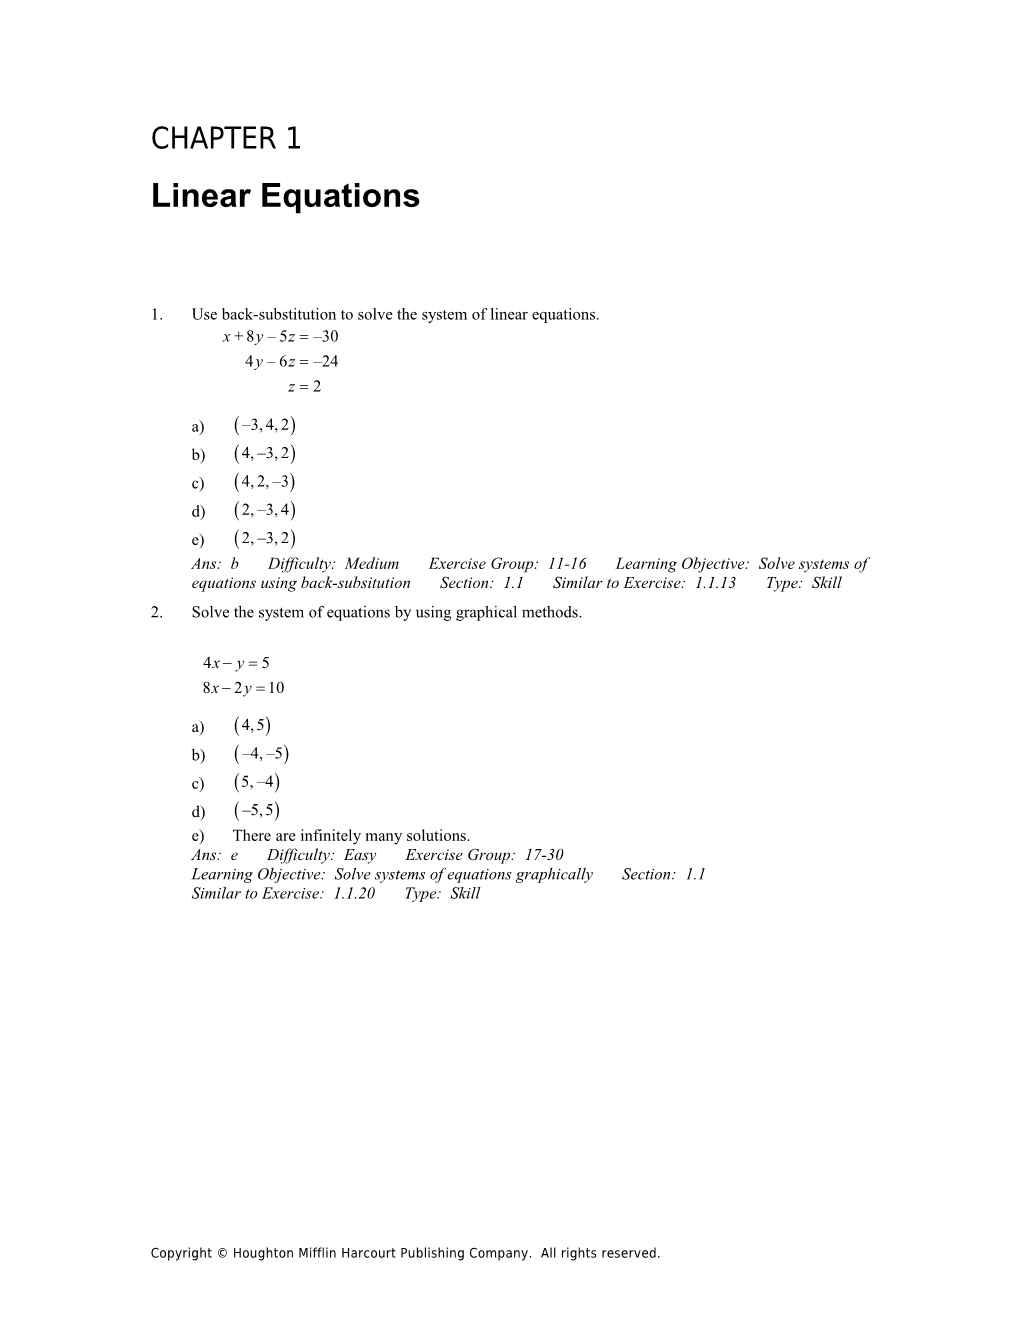 1. Use Back-Substitution to Solve the System of Linear Equations